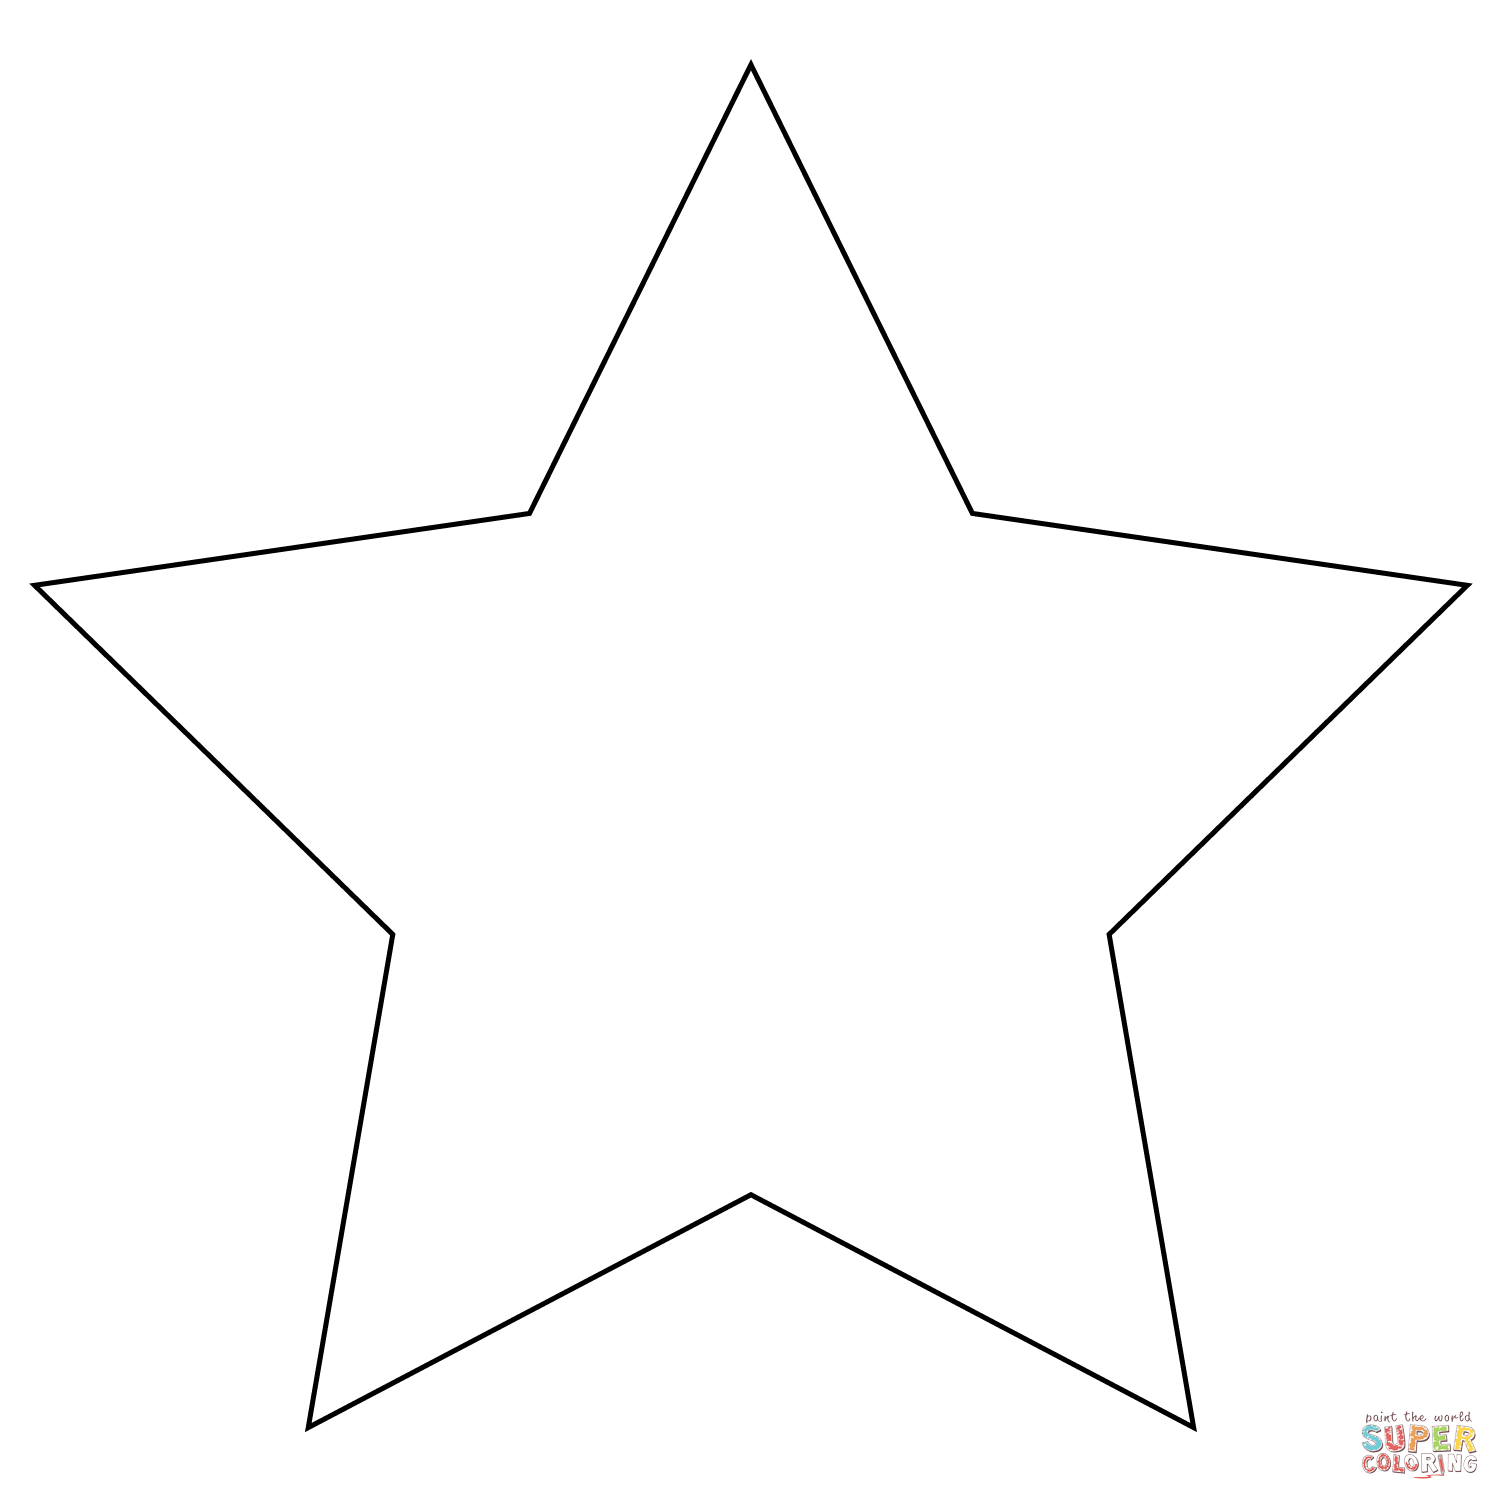 Five Pointed Star Coloring Page | Free Printable Coloring Pages - Star Of David Template Free Printable